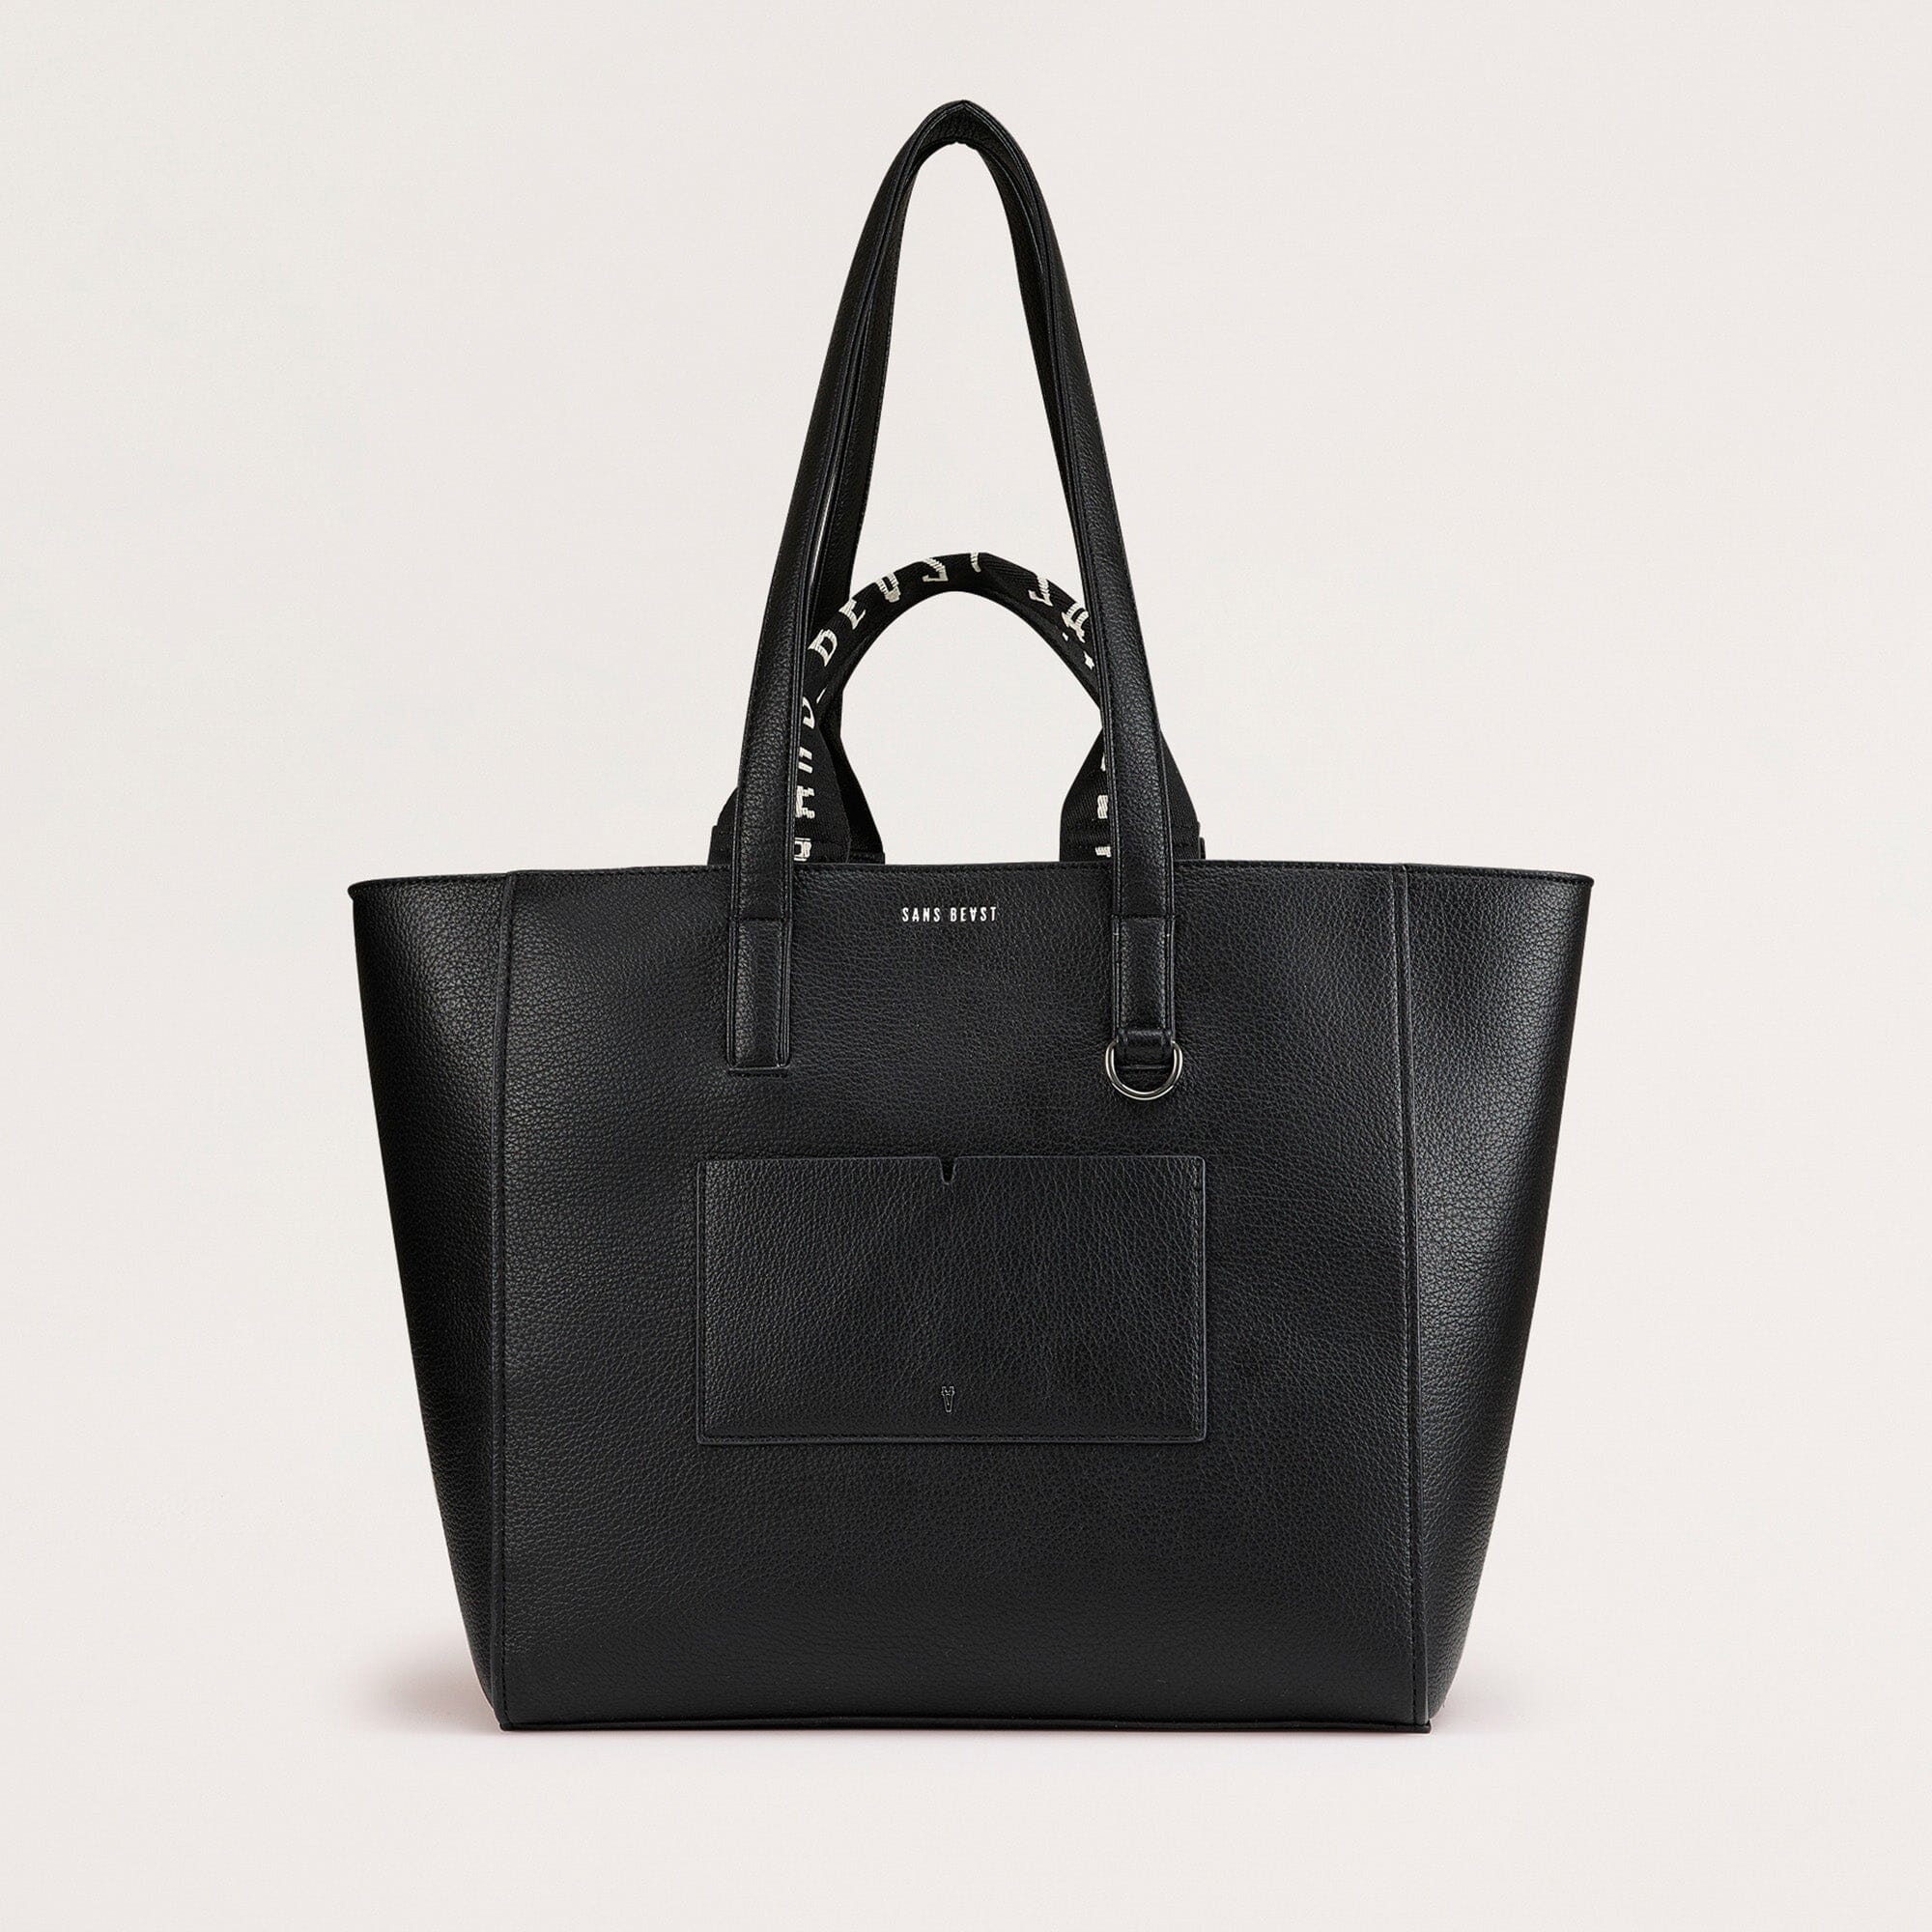 Archive Vegan Leather Tote Bag Black front view